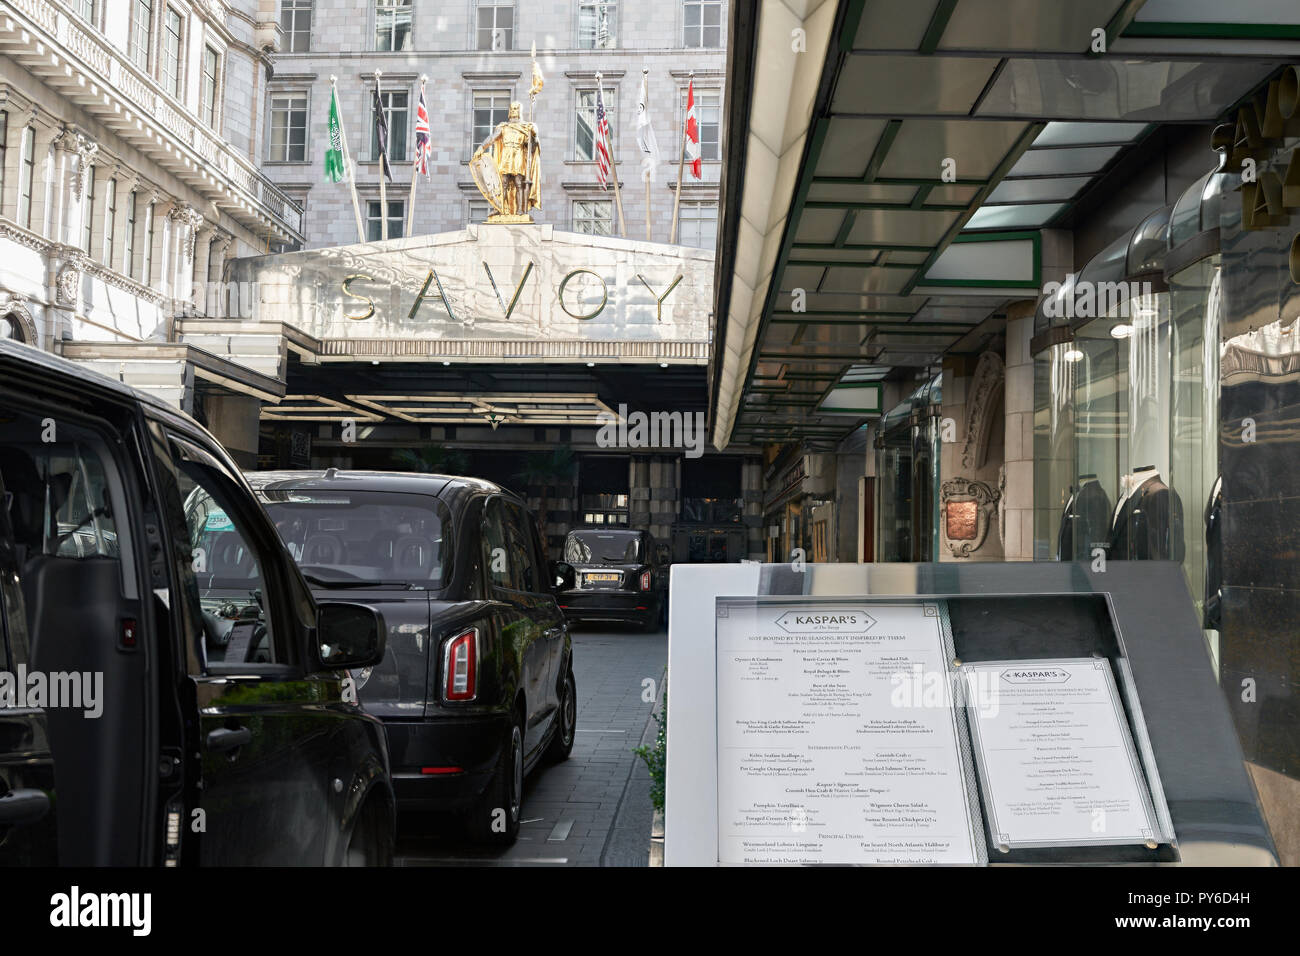 Menu for Kaspar's restaurant at the entrance to the Savoy hotel, London, England. Stock Photo